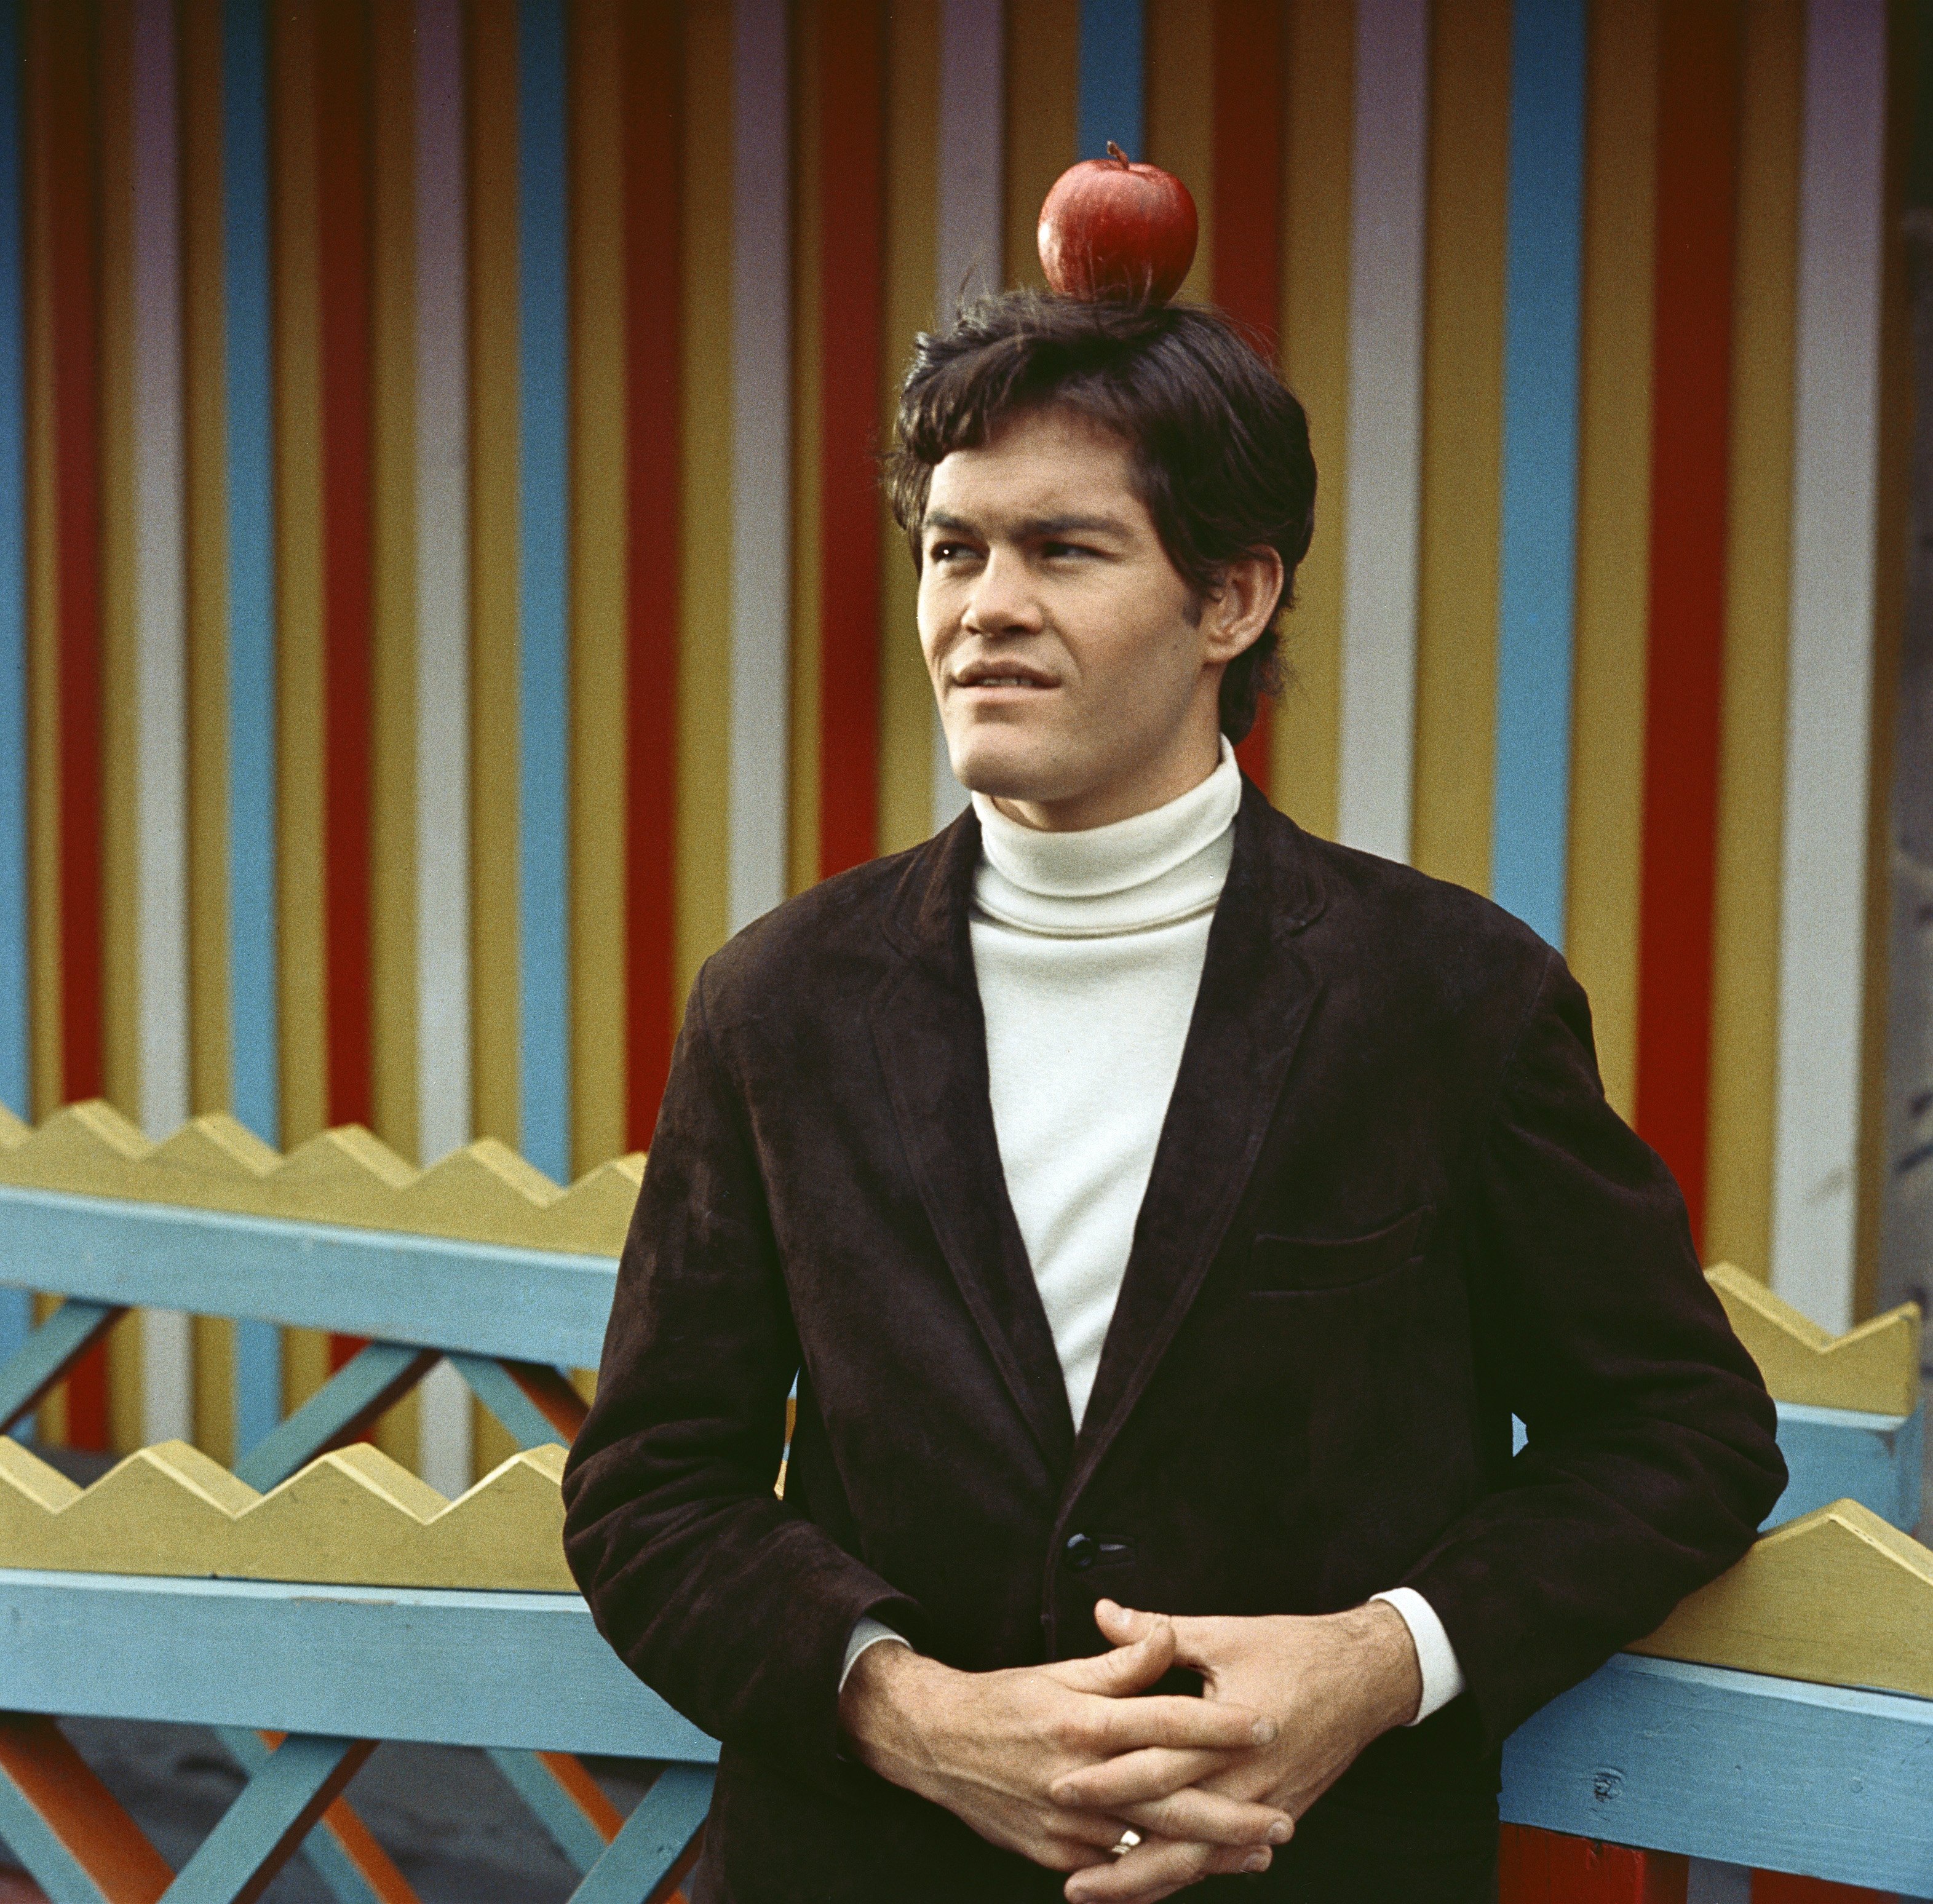 The Monkees' Micky Dolenz with an apple on his head